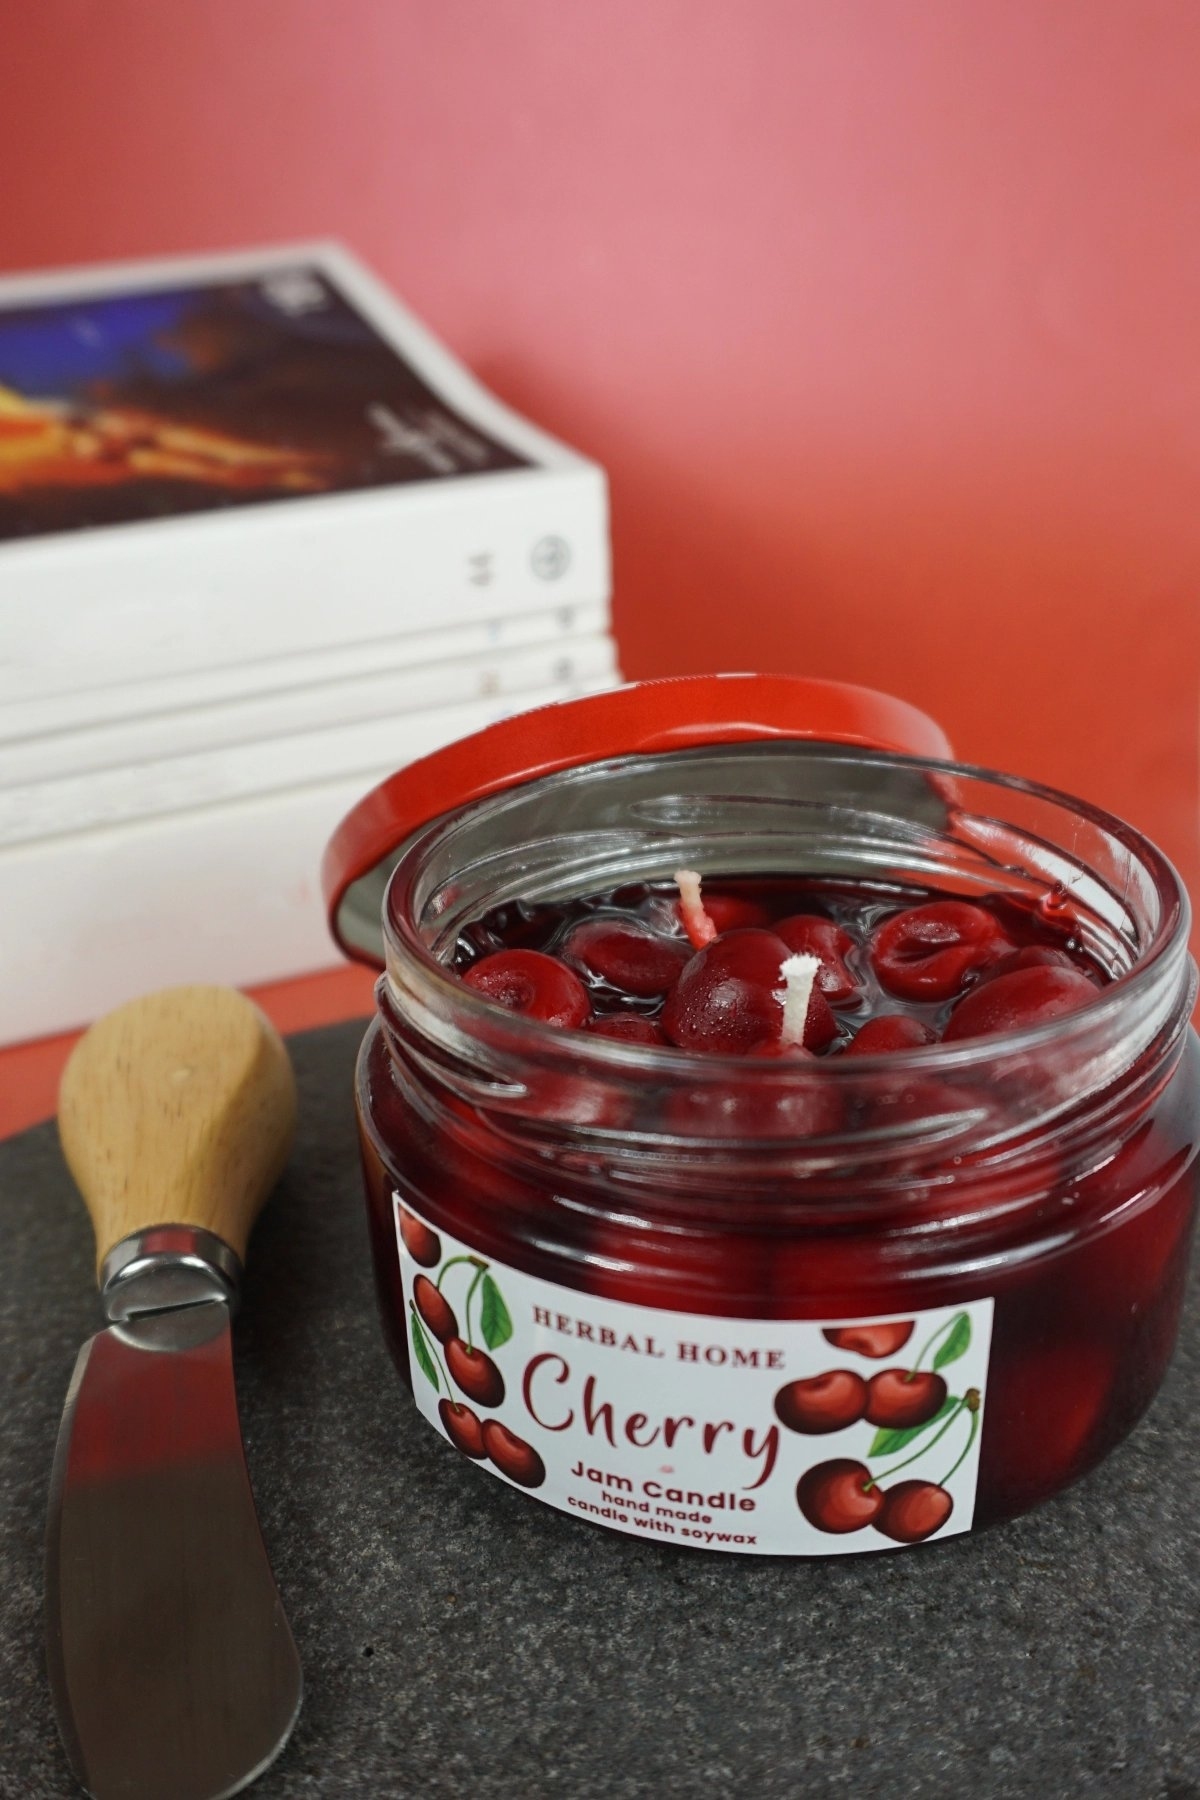 HERBAL HOME Cherry Jam Candle 220 GR - 1